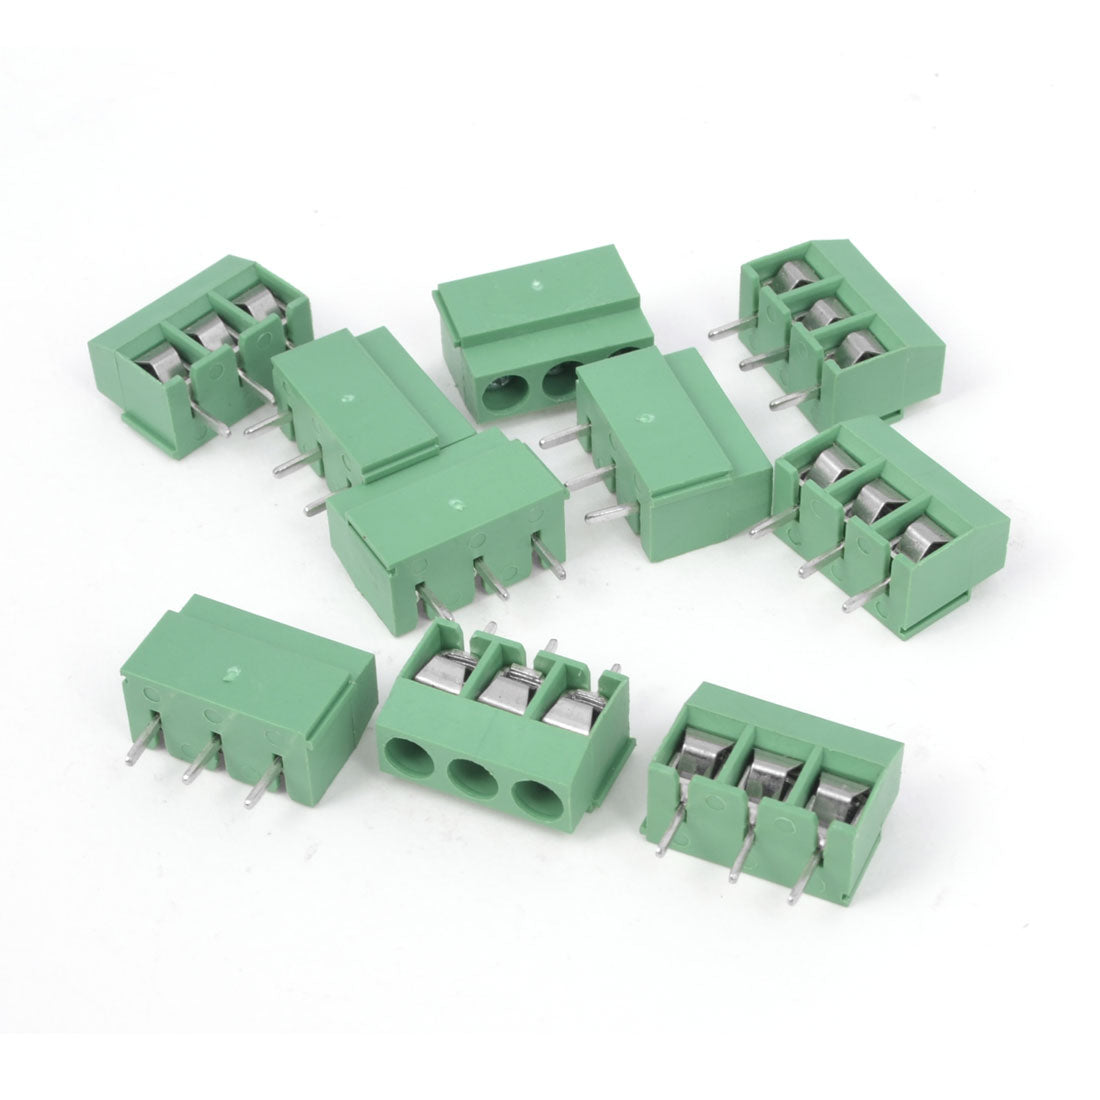 uxcell Uxcell 10 Pcs 300V 10A 3P Poles Pitch 5mm PCB Mounted Screw Terminal Block Connector Green